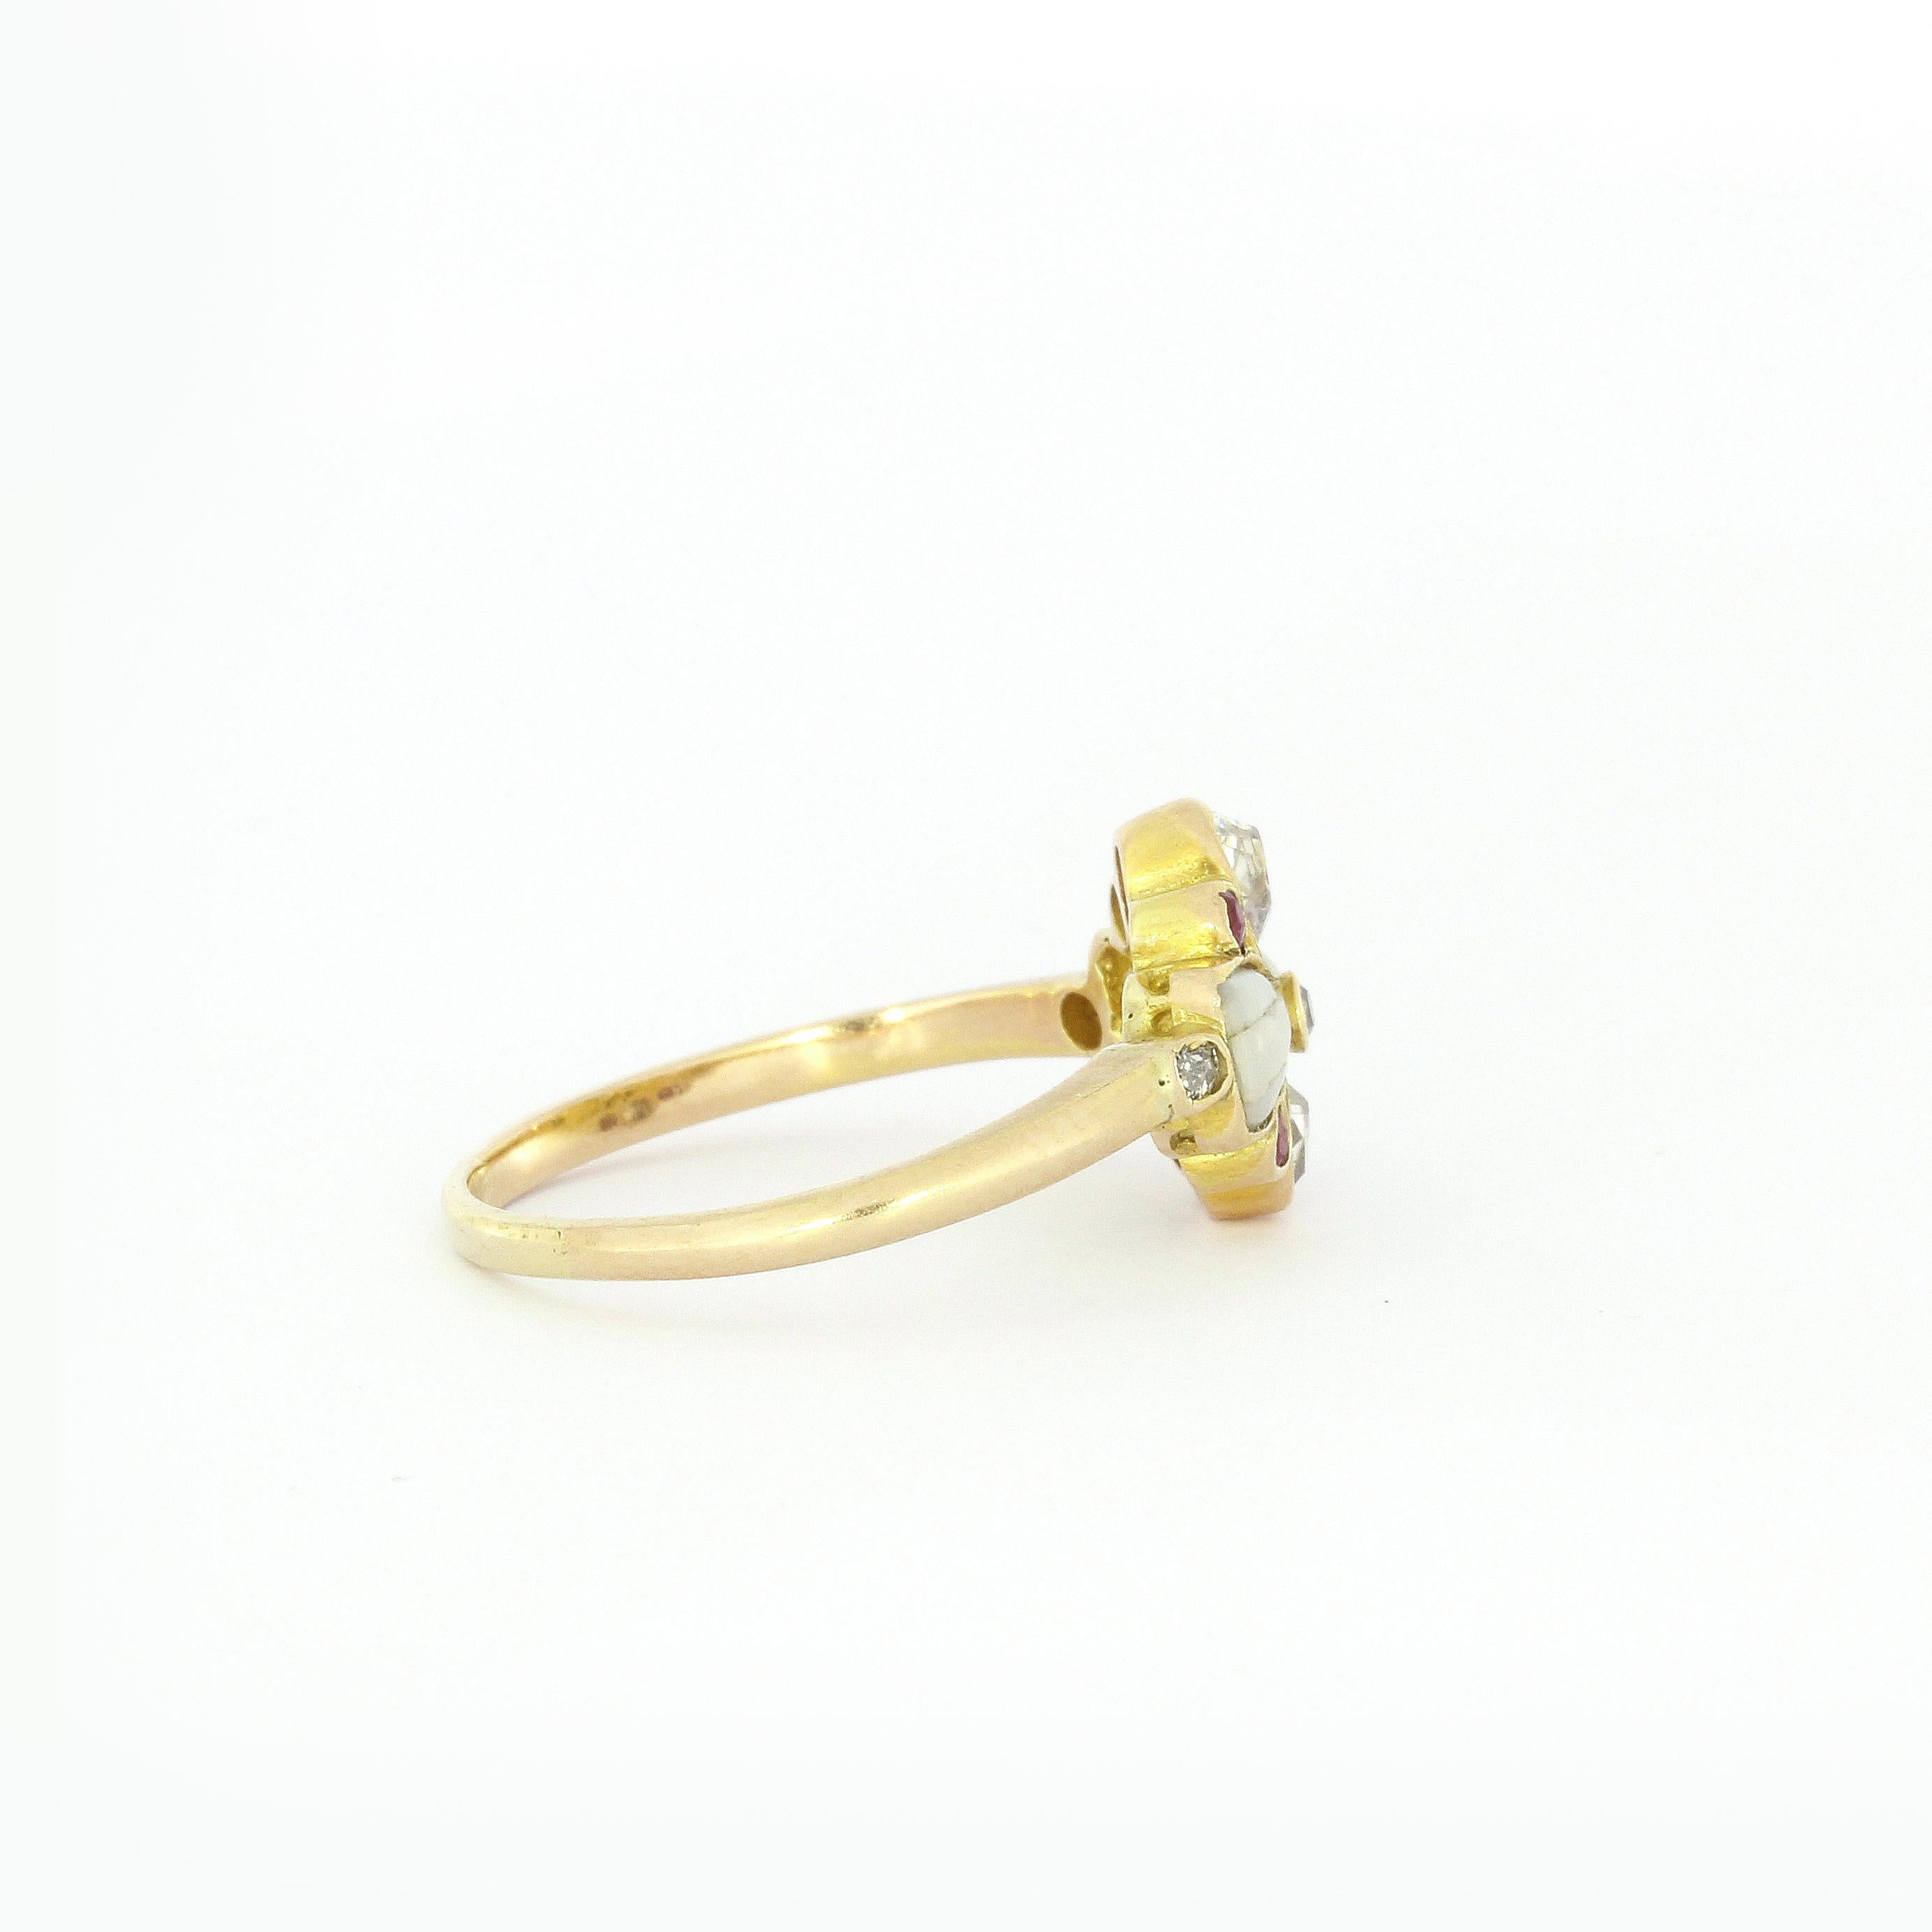 Art Nouveau Floral Diamond Ruby Ring in Yellow Gold 1